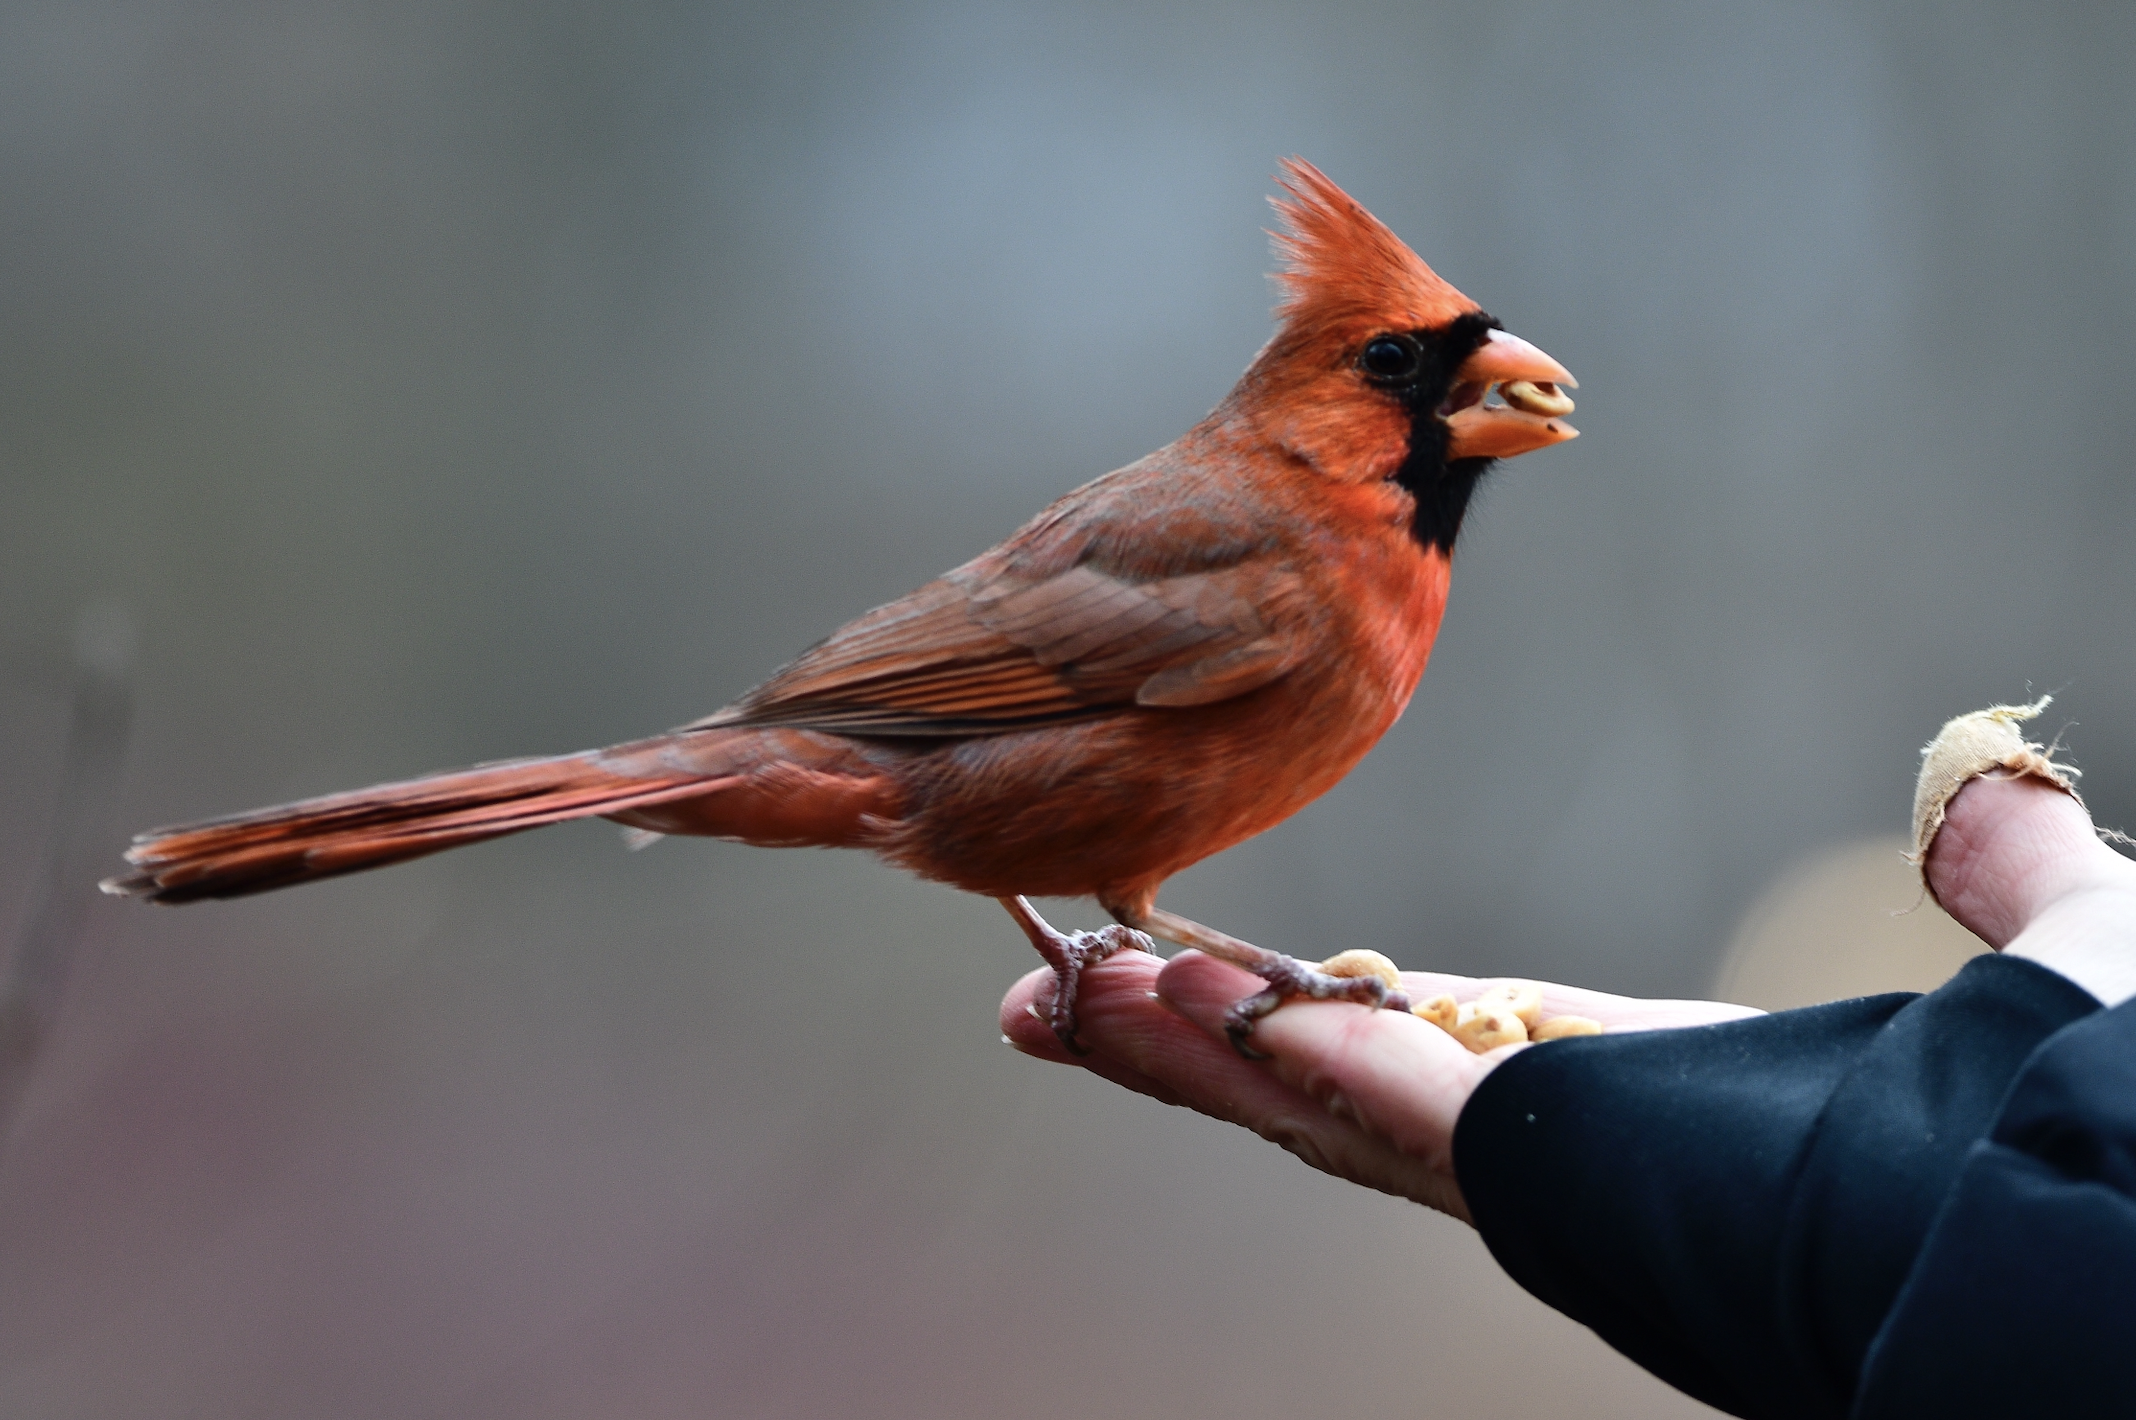 A bright red cardinal eats from a hand in Central Park.